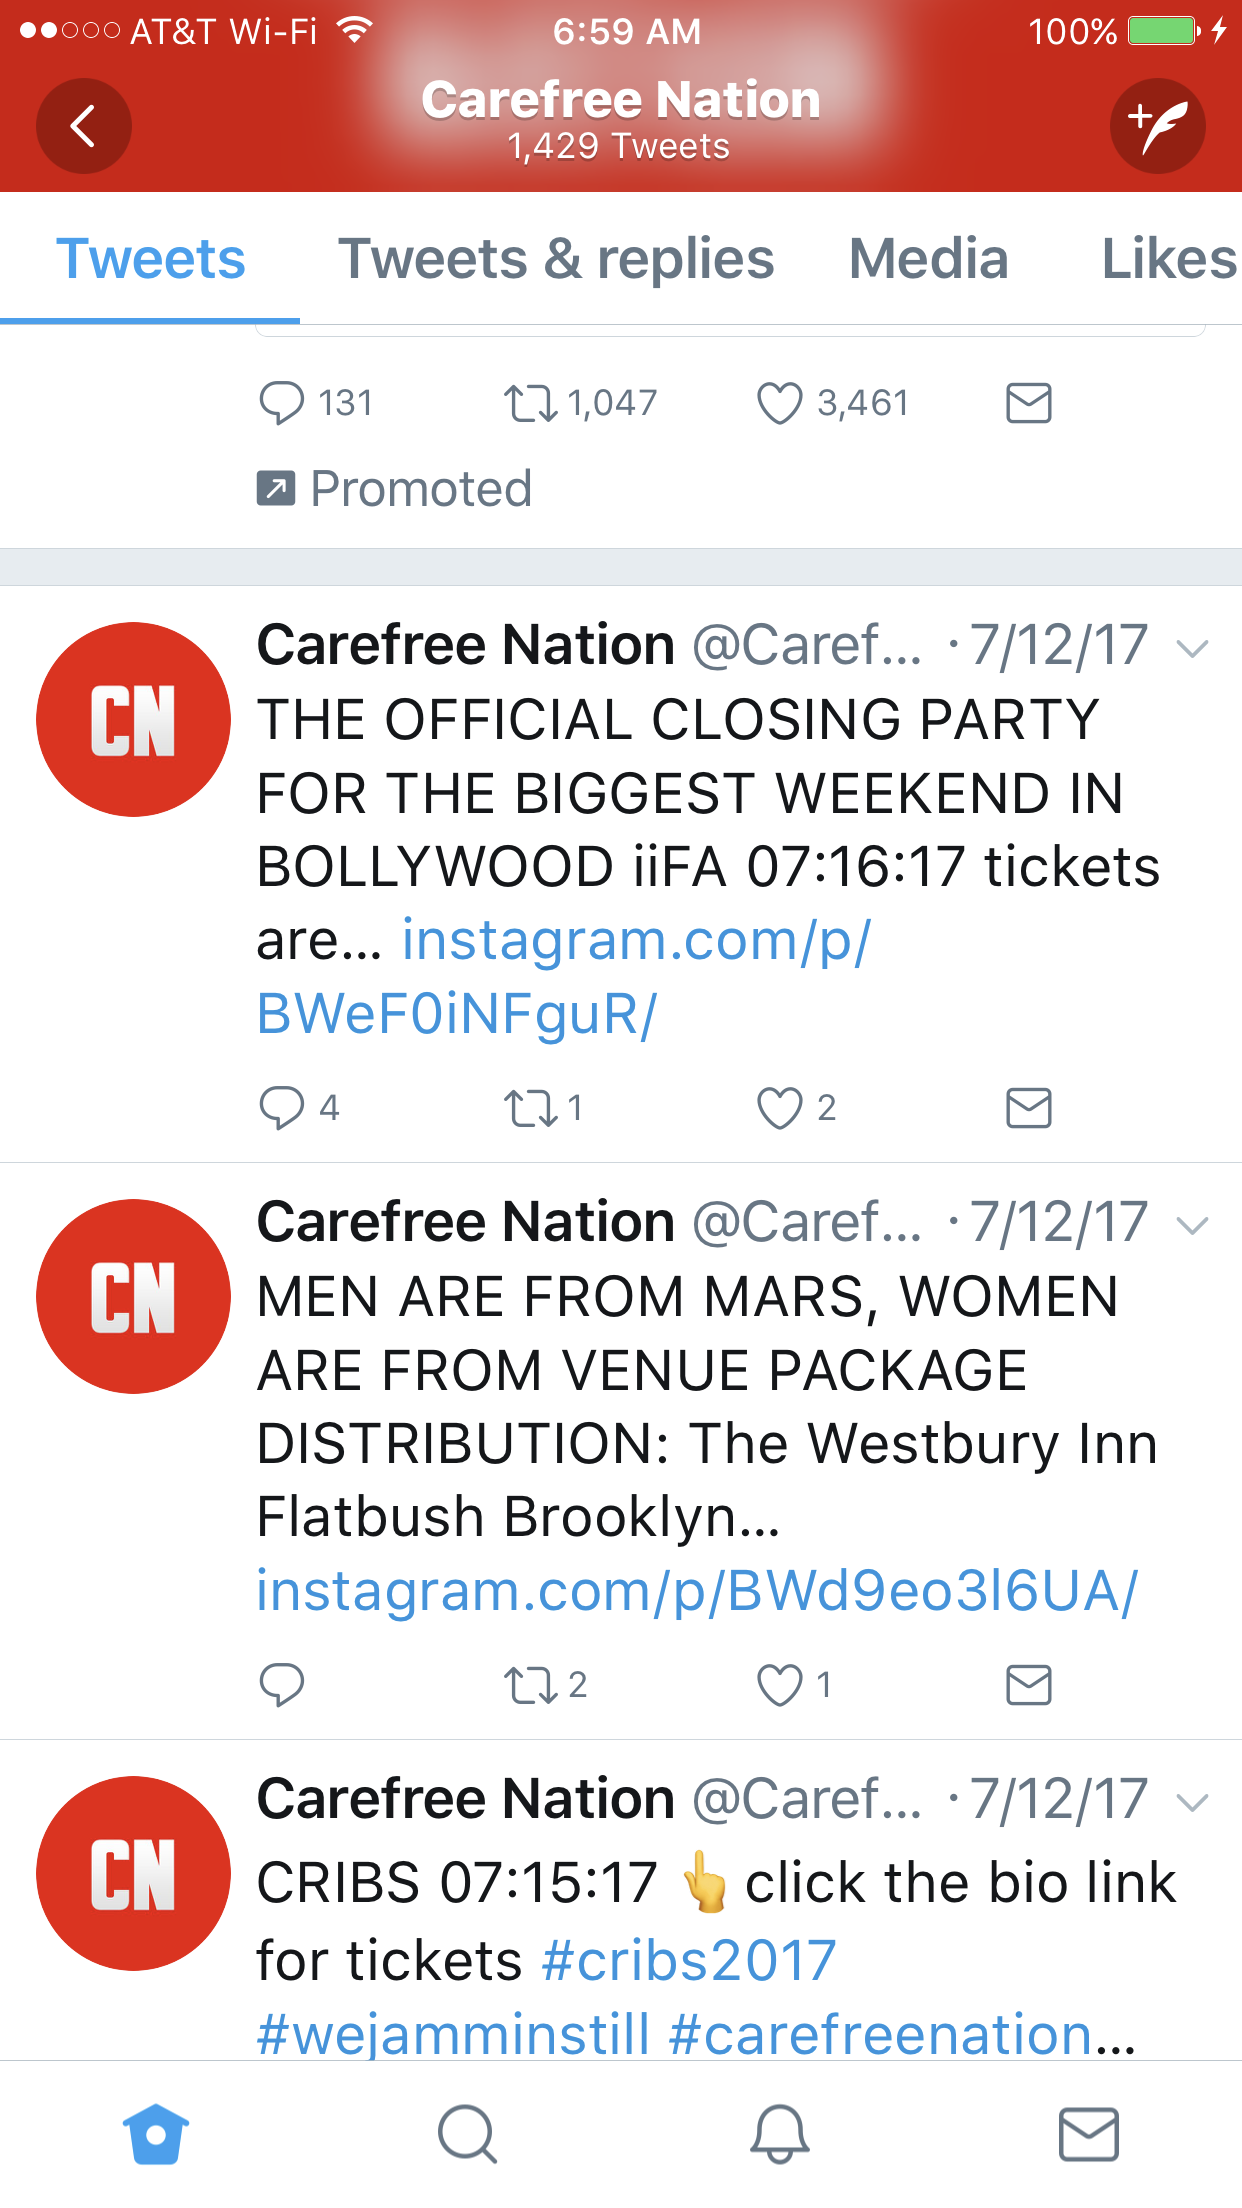 IIFA Closing Party by Carefree Nation, SCAM!